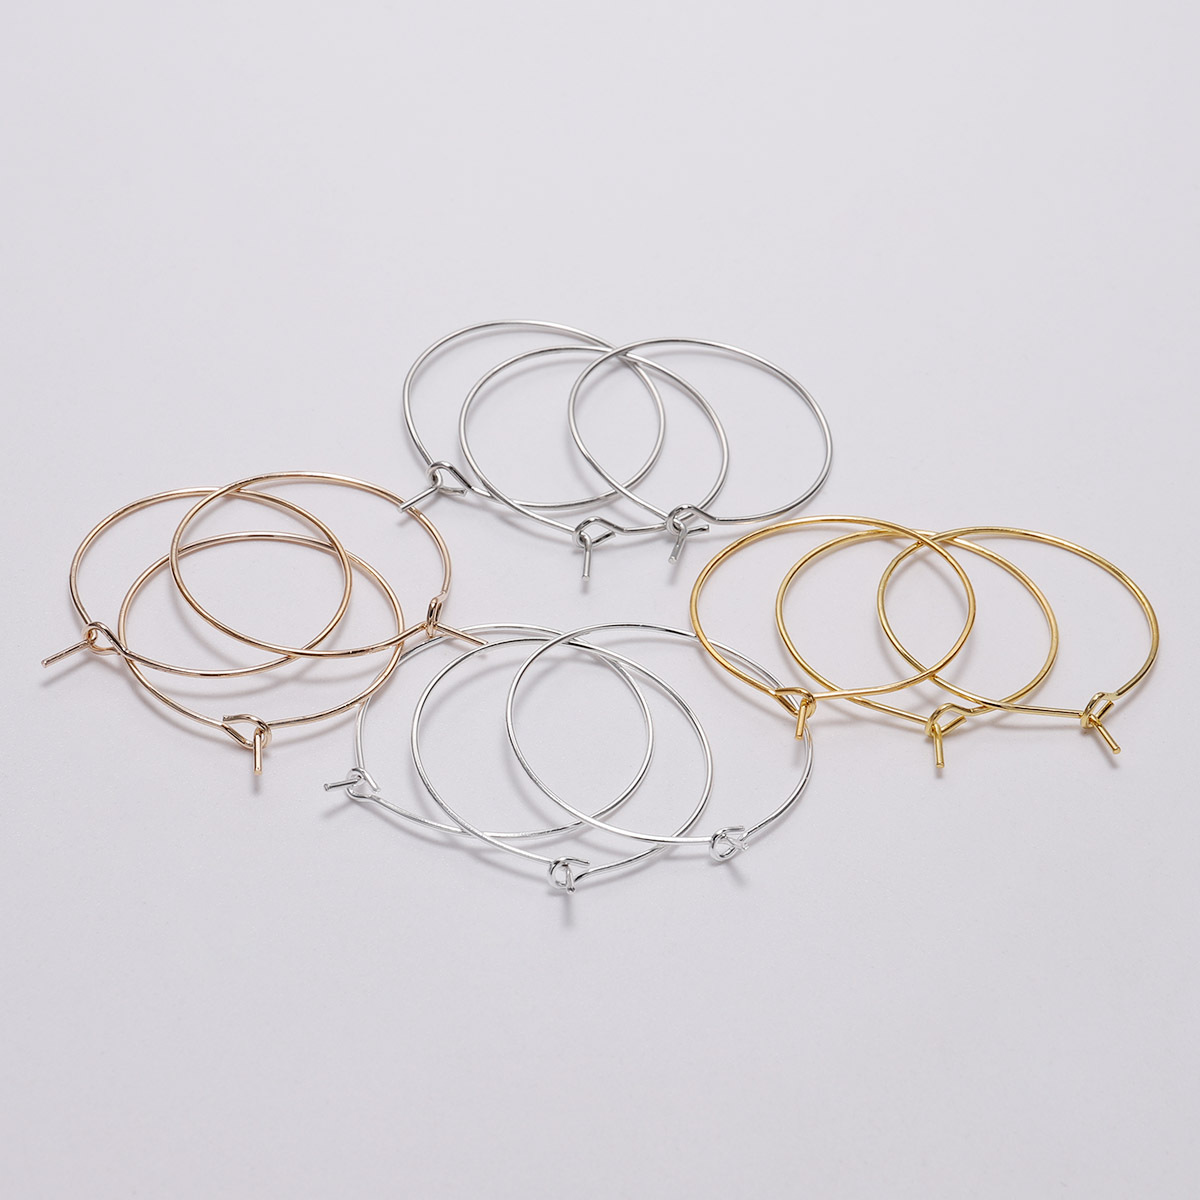 

50pcs/lot Kc Golden Silver Color Hoops Earrings Big Circle Ear Hoops Earrings Wires 20/25/30/35mm For Diy Jewelry Earrings Making Accessories Small Business Supplies